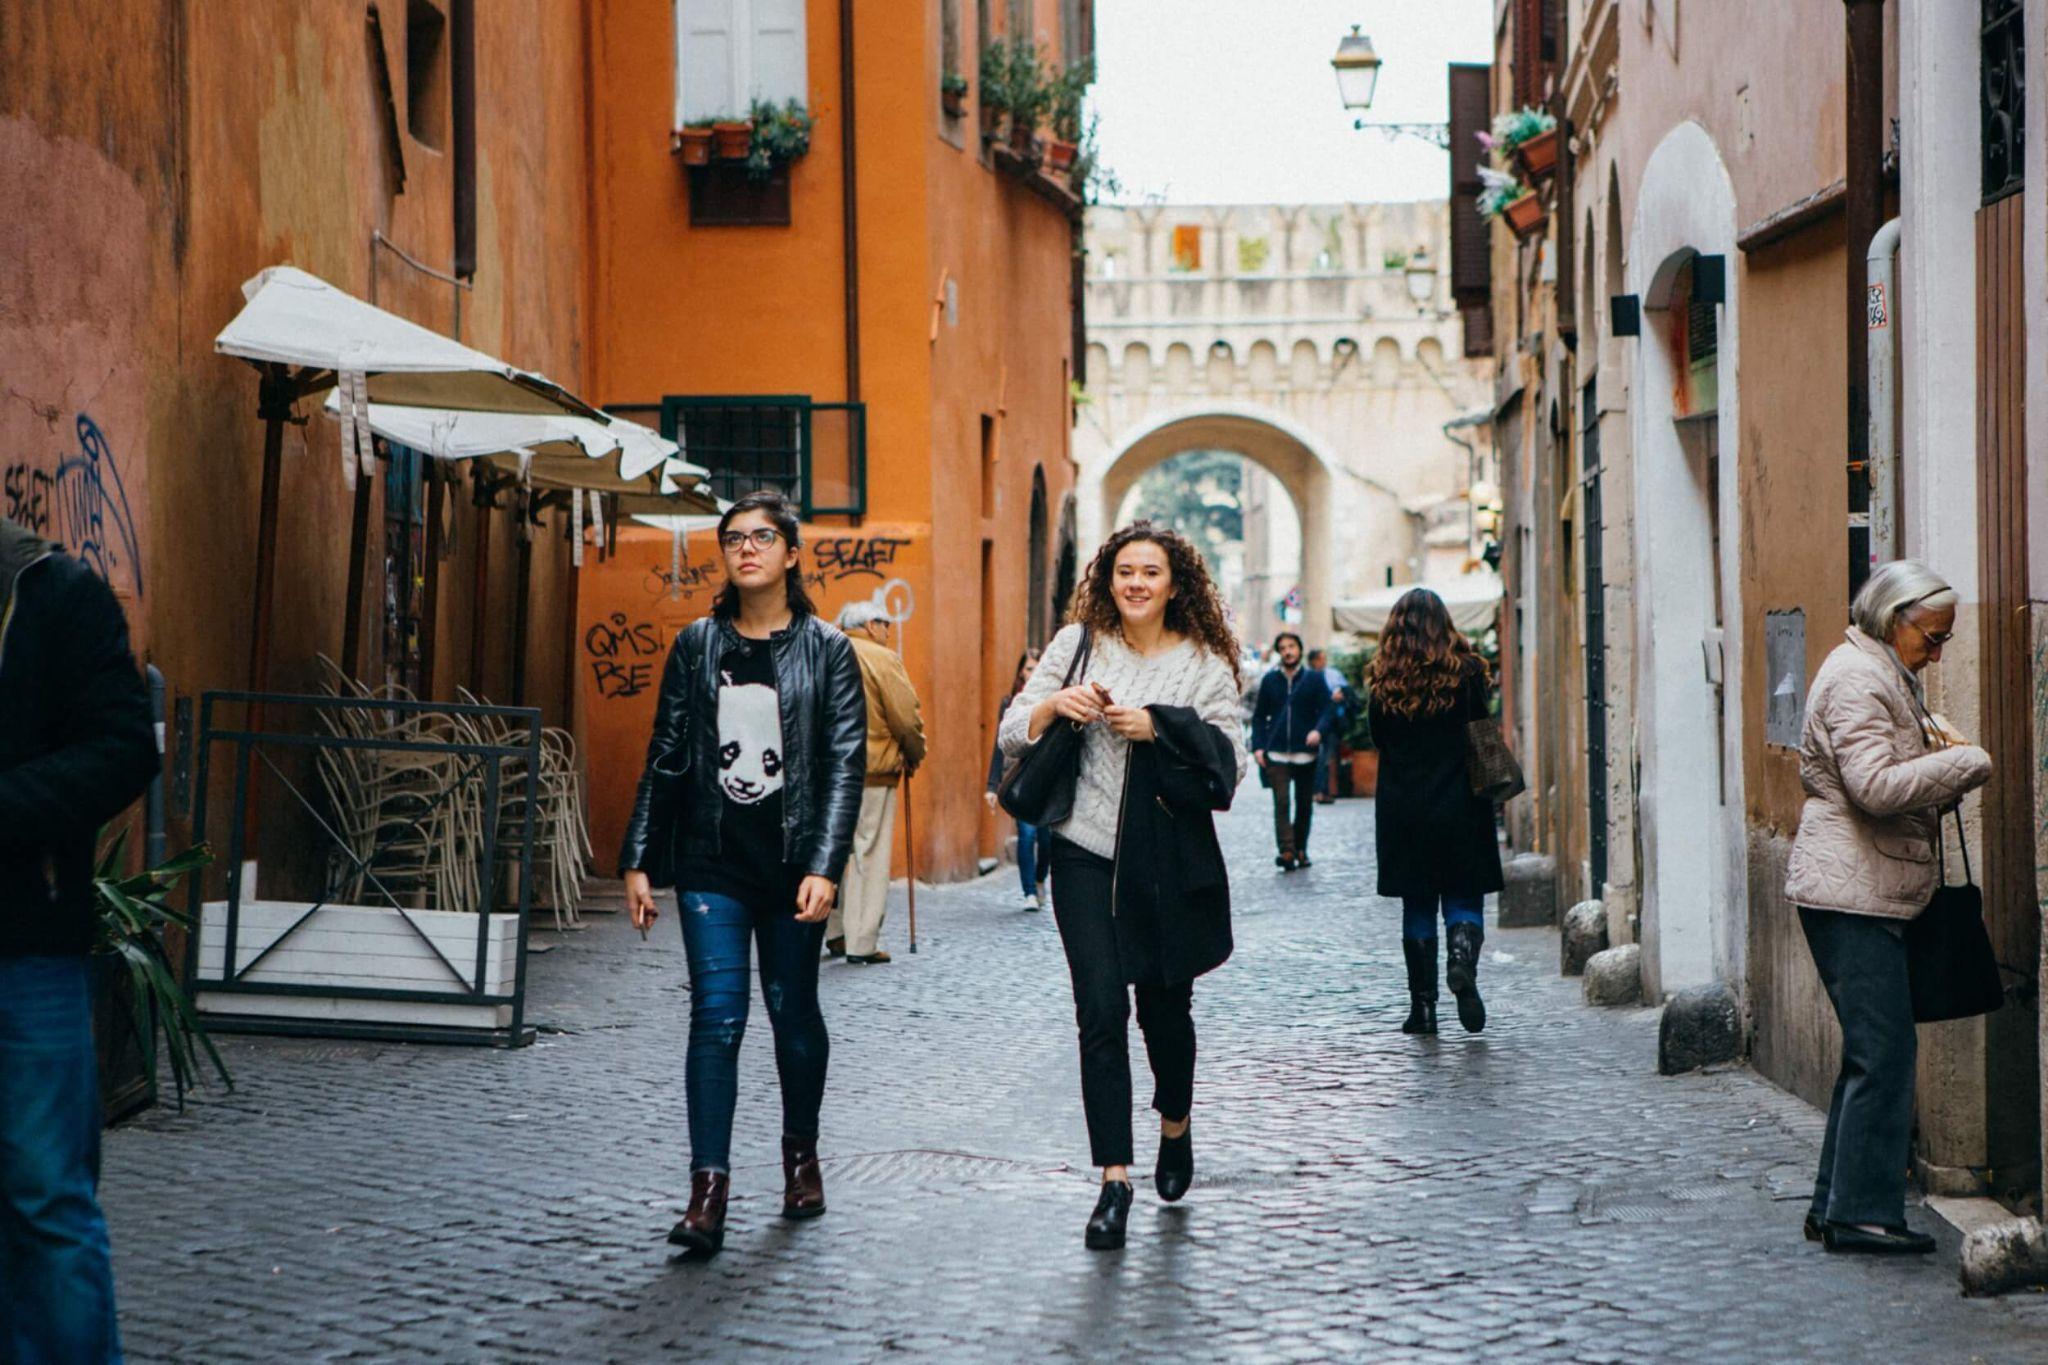 A pair of students walking in the center square shopping sustainability as they study abroad in Rome.